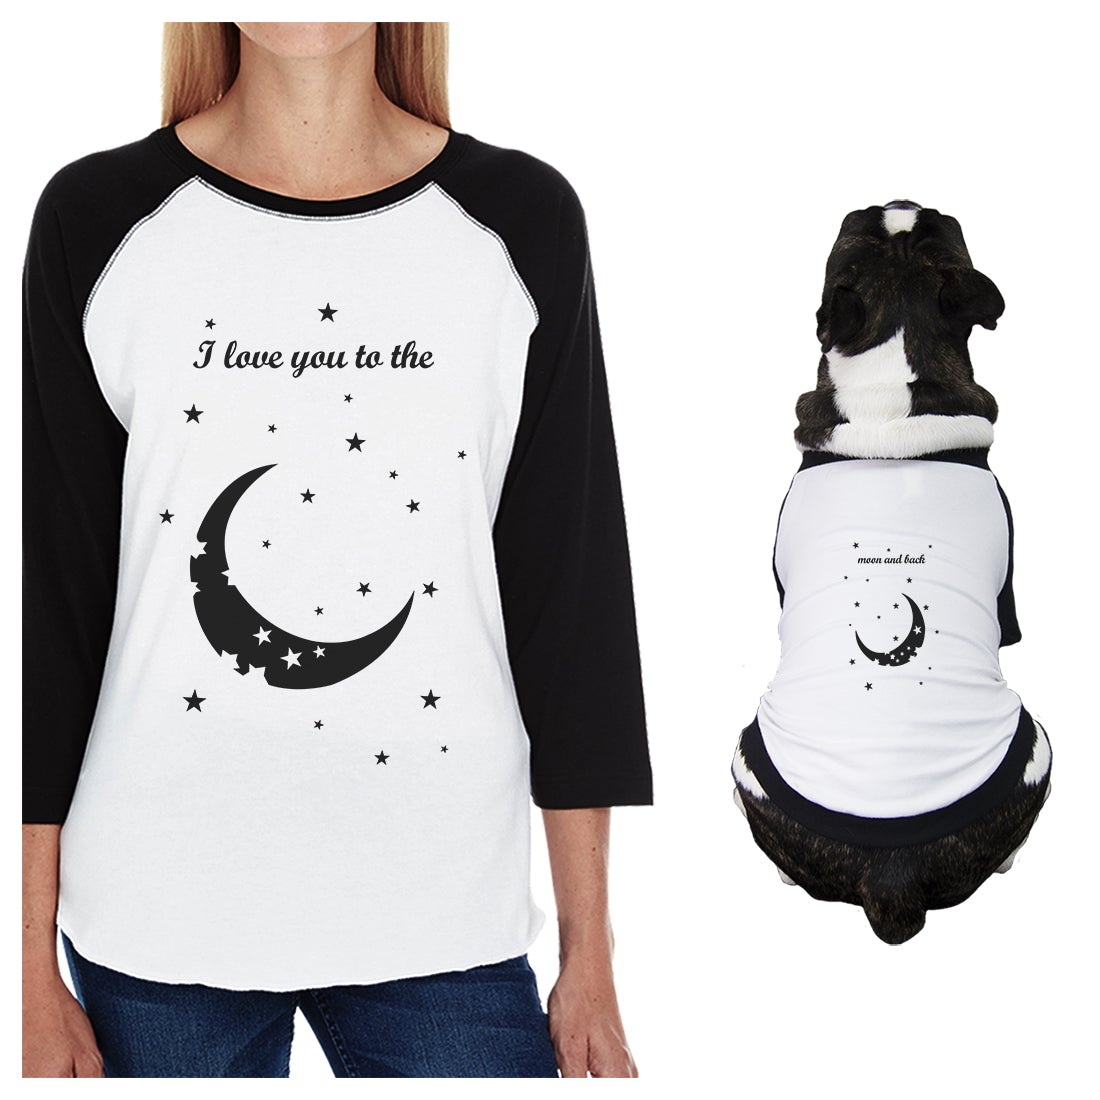 Moon And Back Small Dog and Mom Matching Outfits Raglan Tees Cotton Black and White